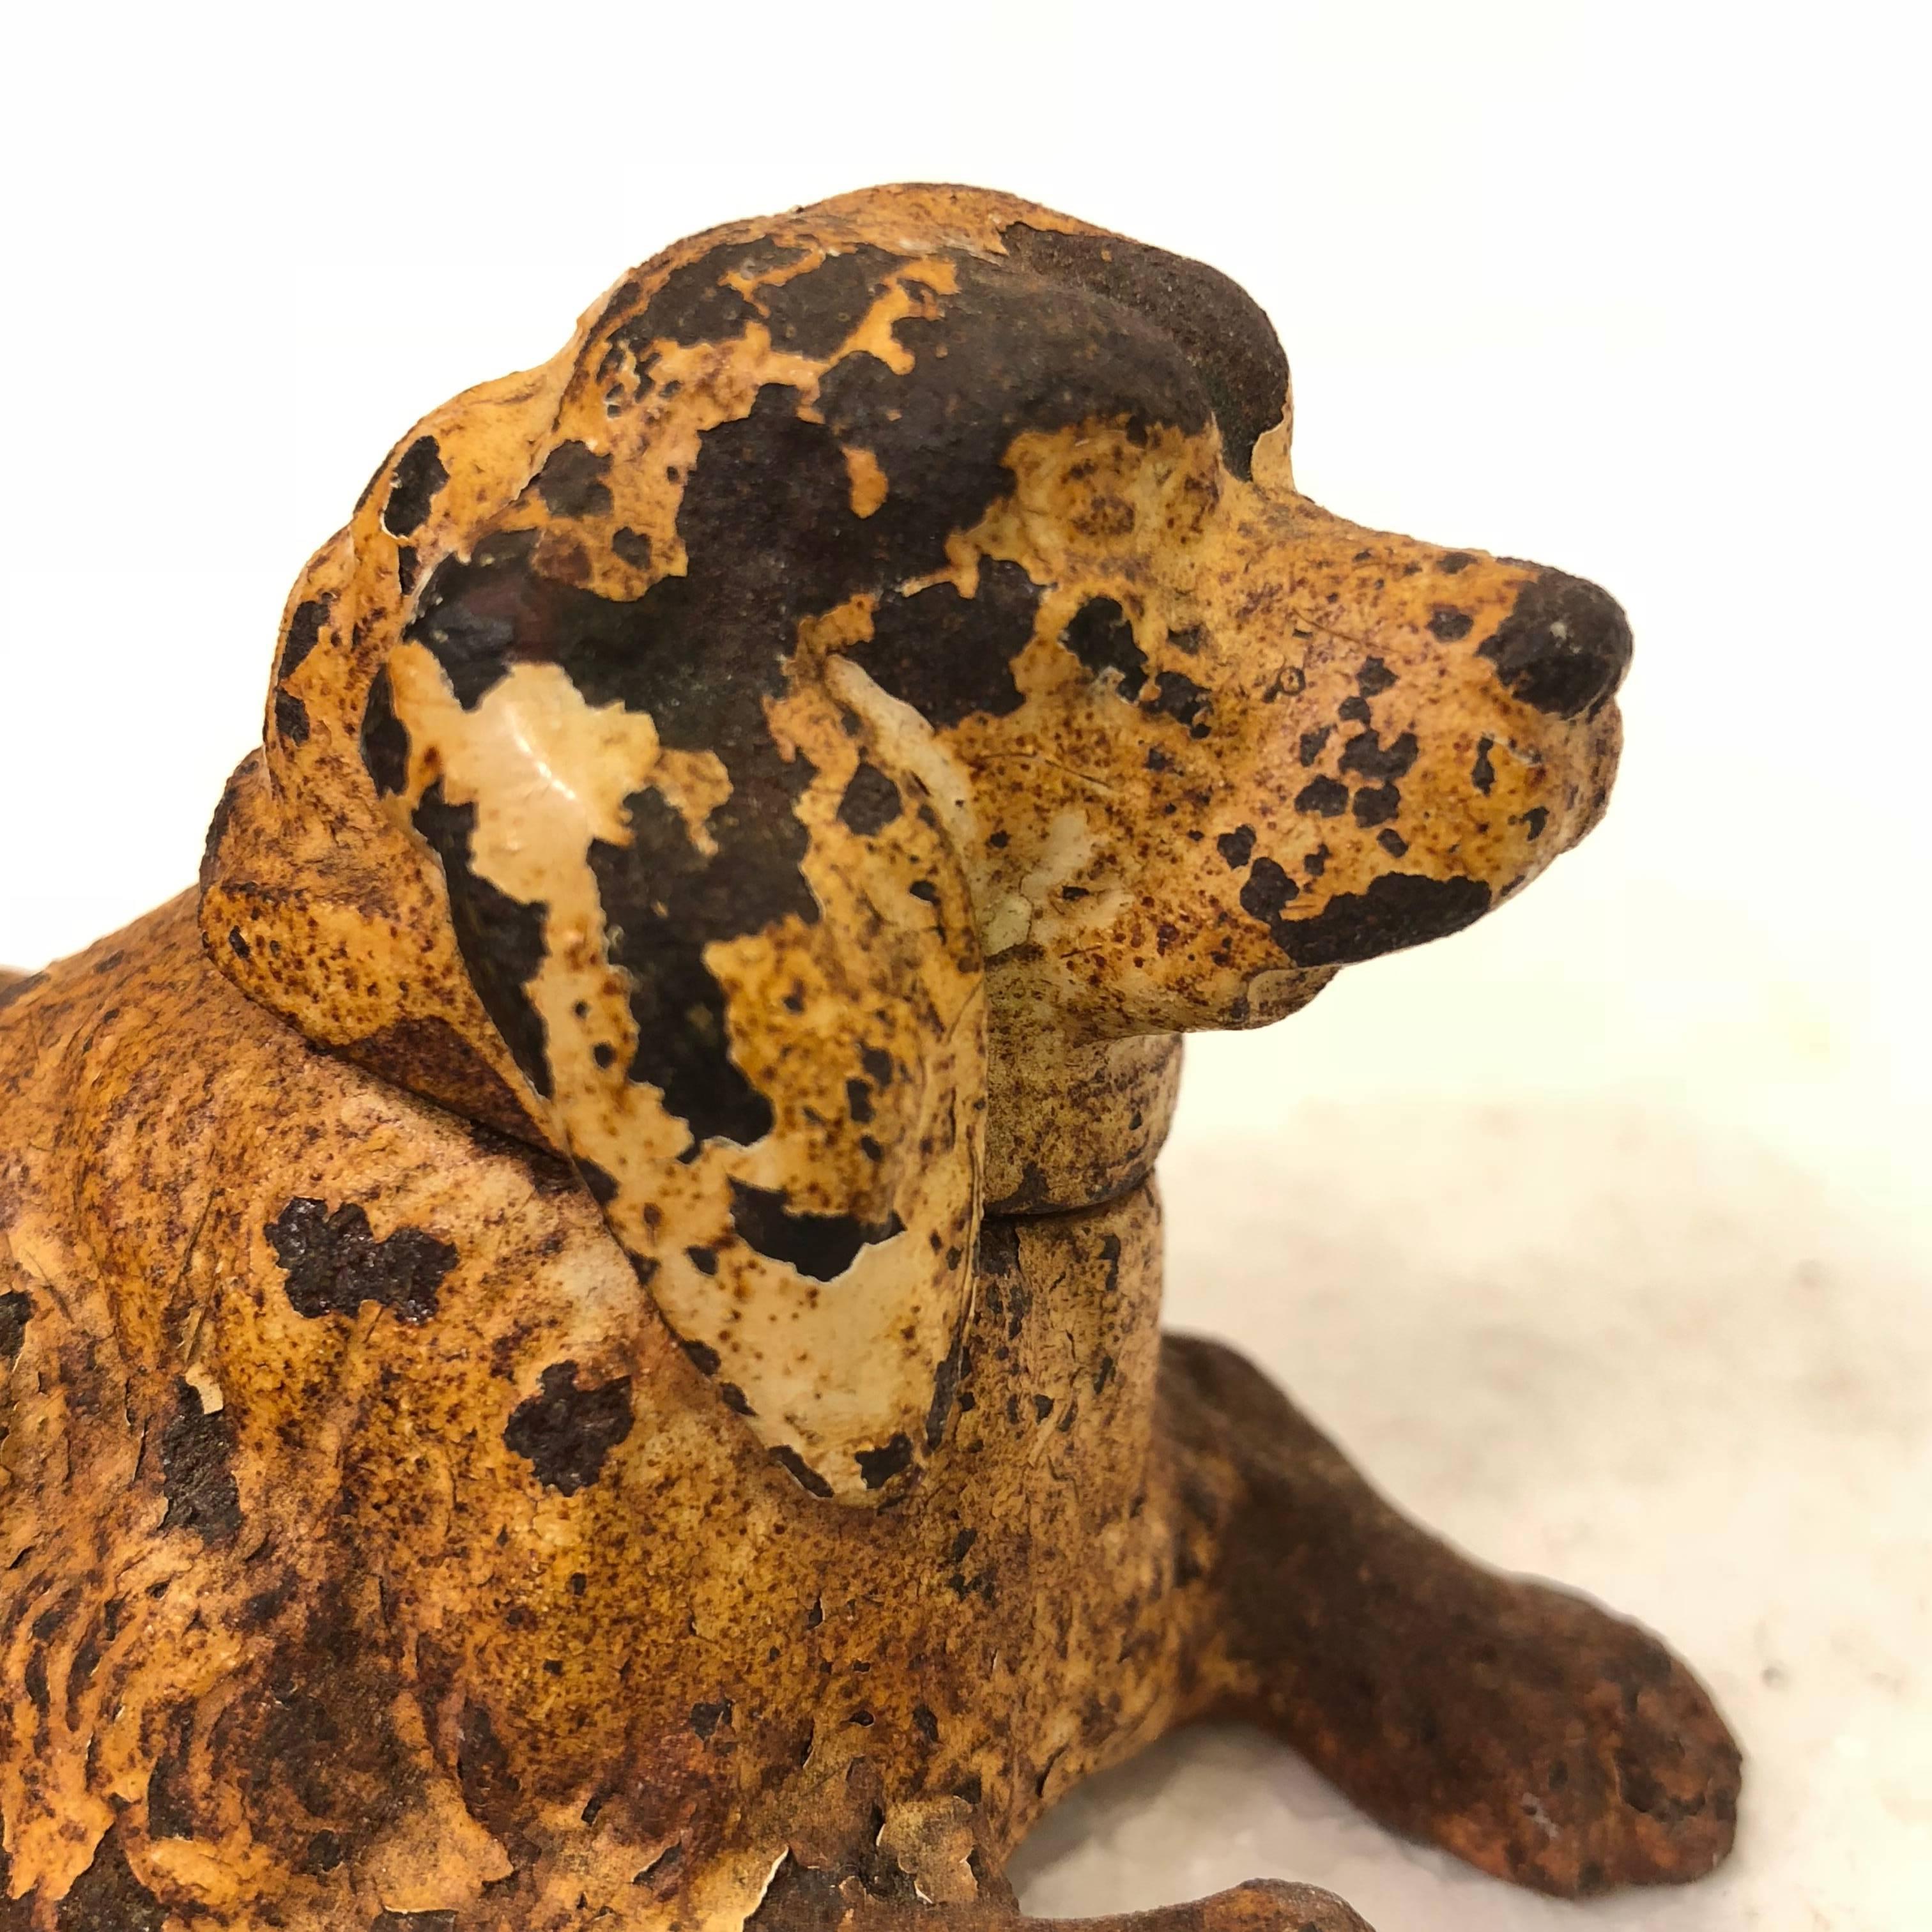 19th Century wrought iron dog sculpture or paperweight of a retriever.